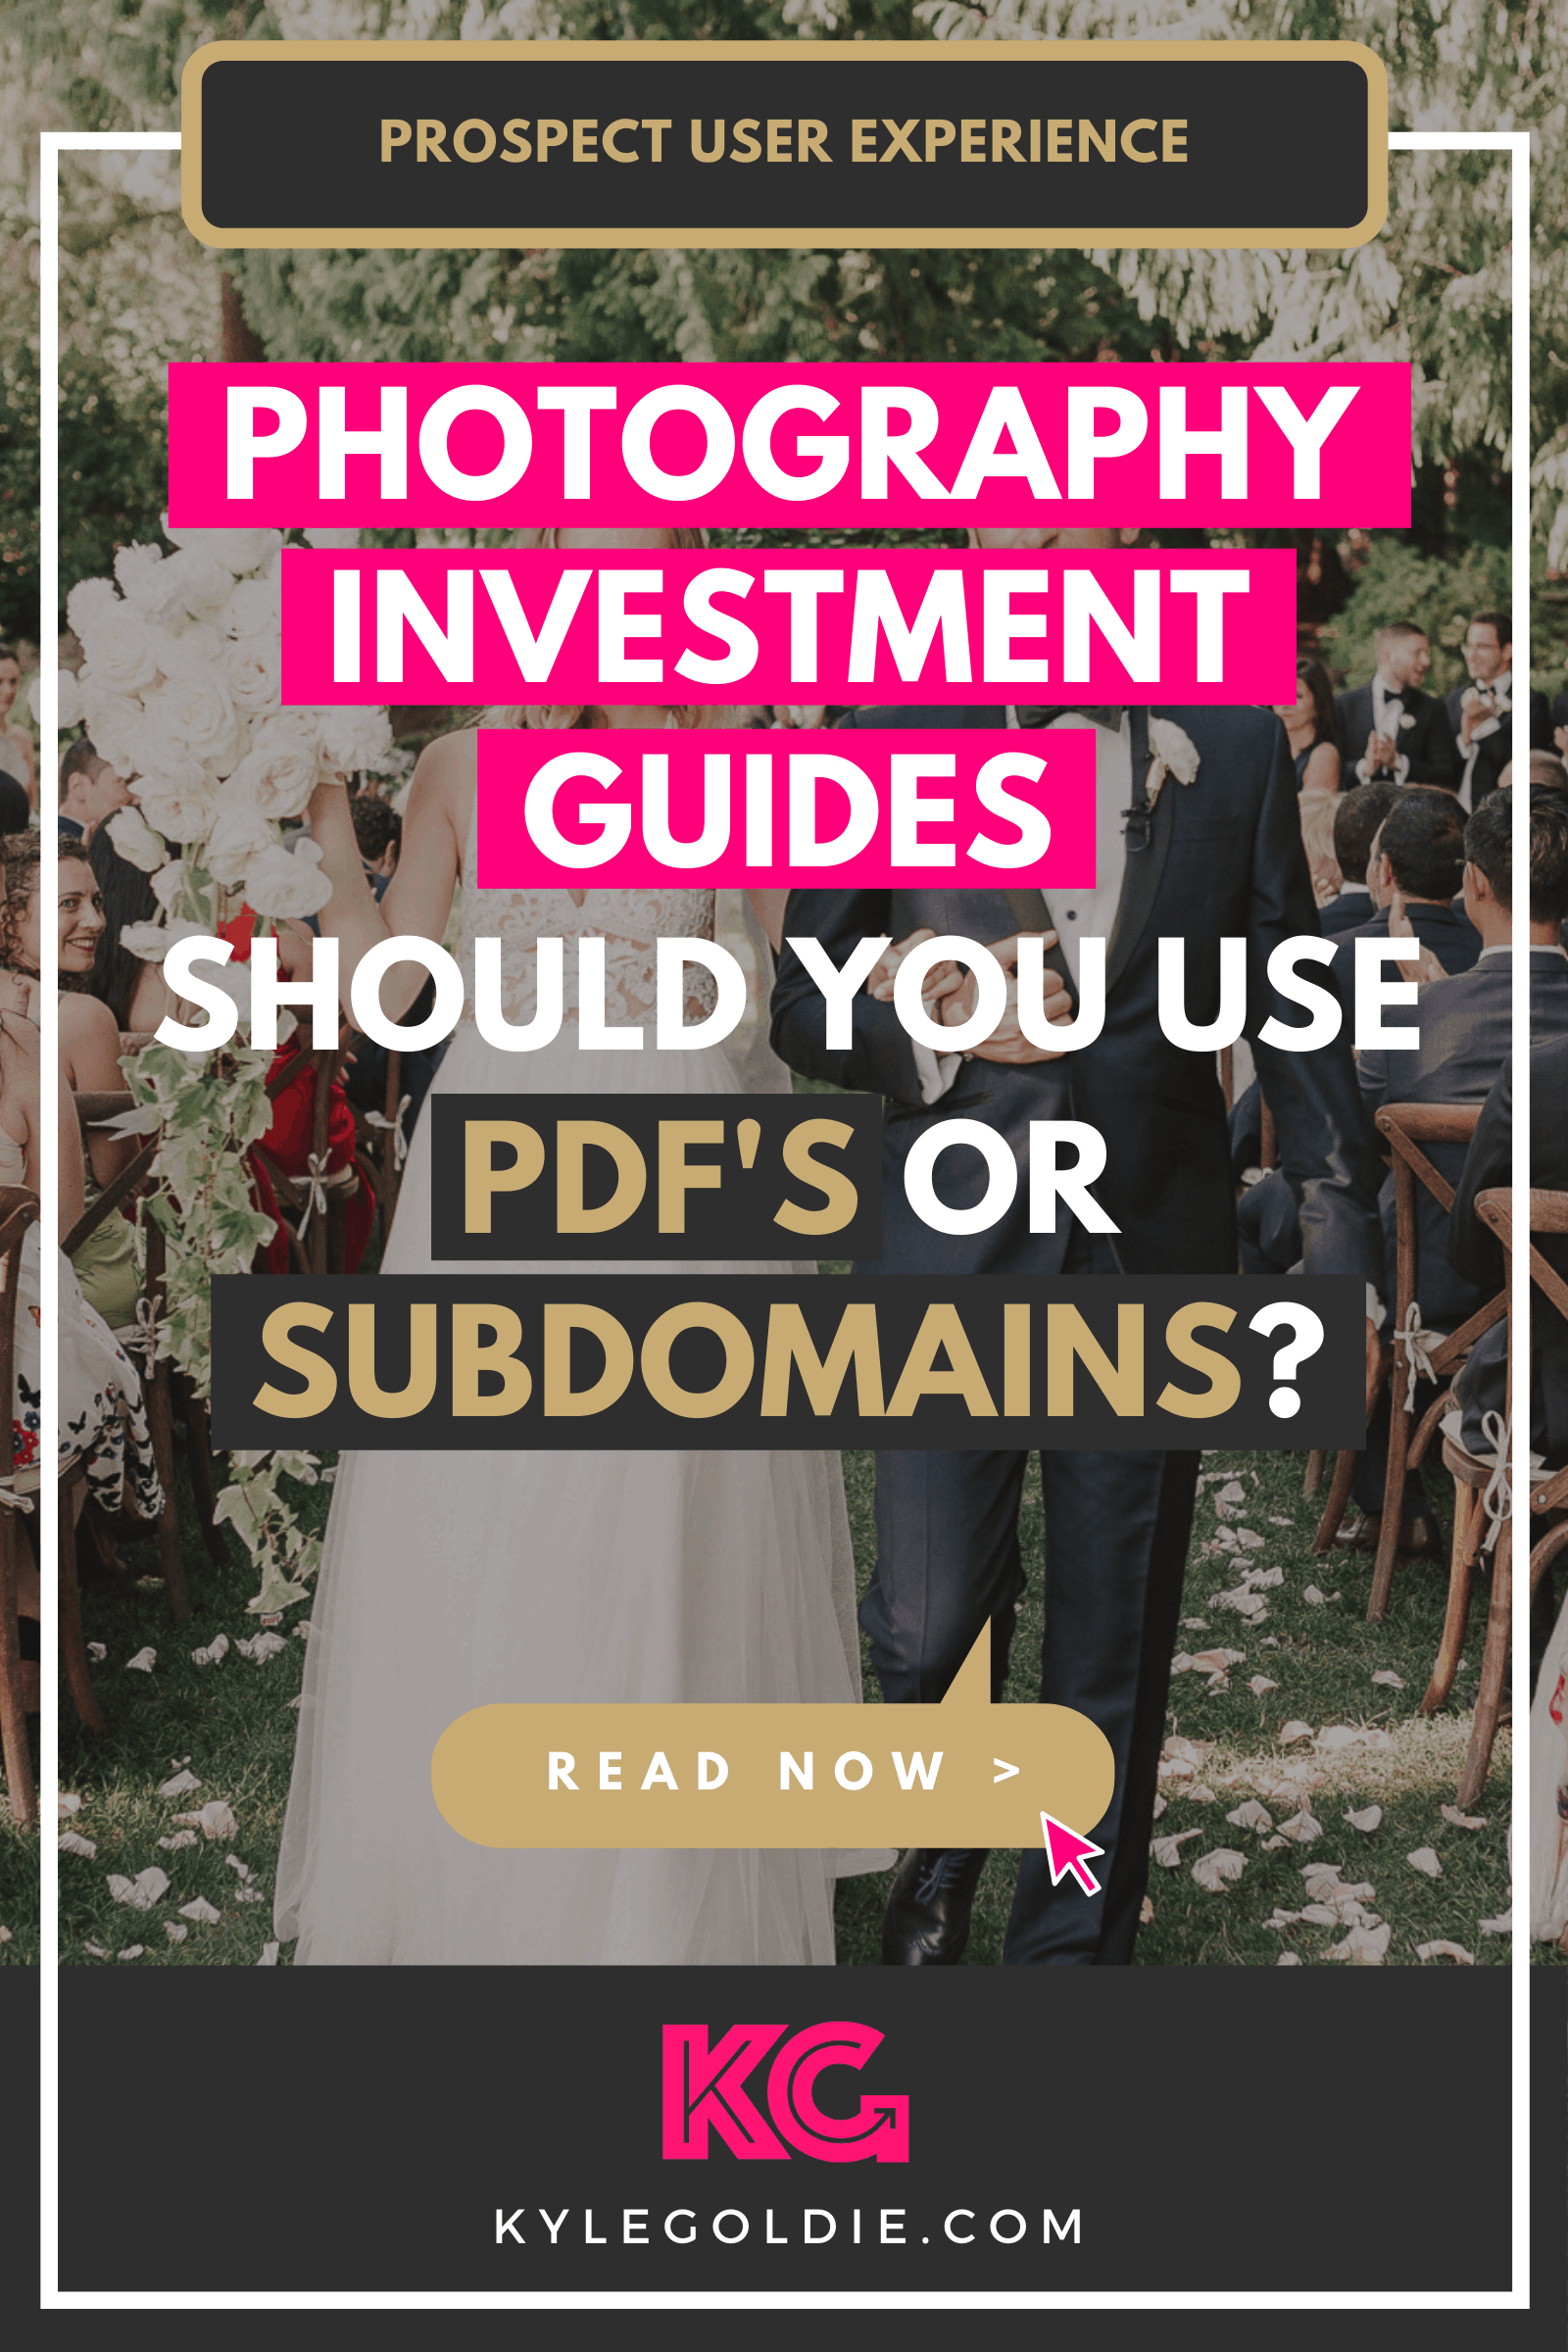 Should you use a PDF or subdomain for your photography investment guide?